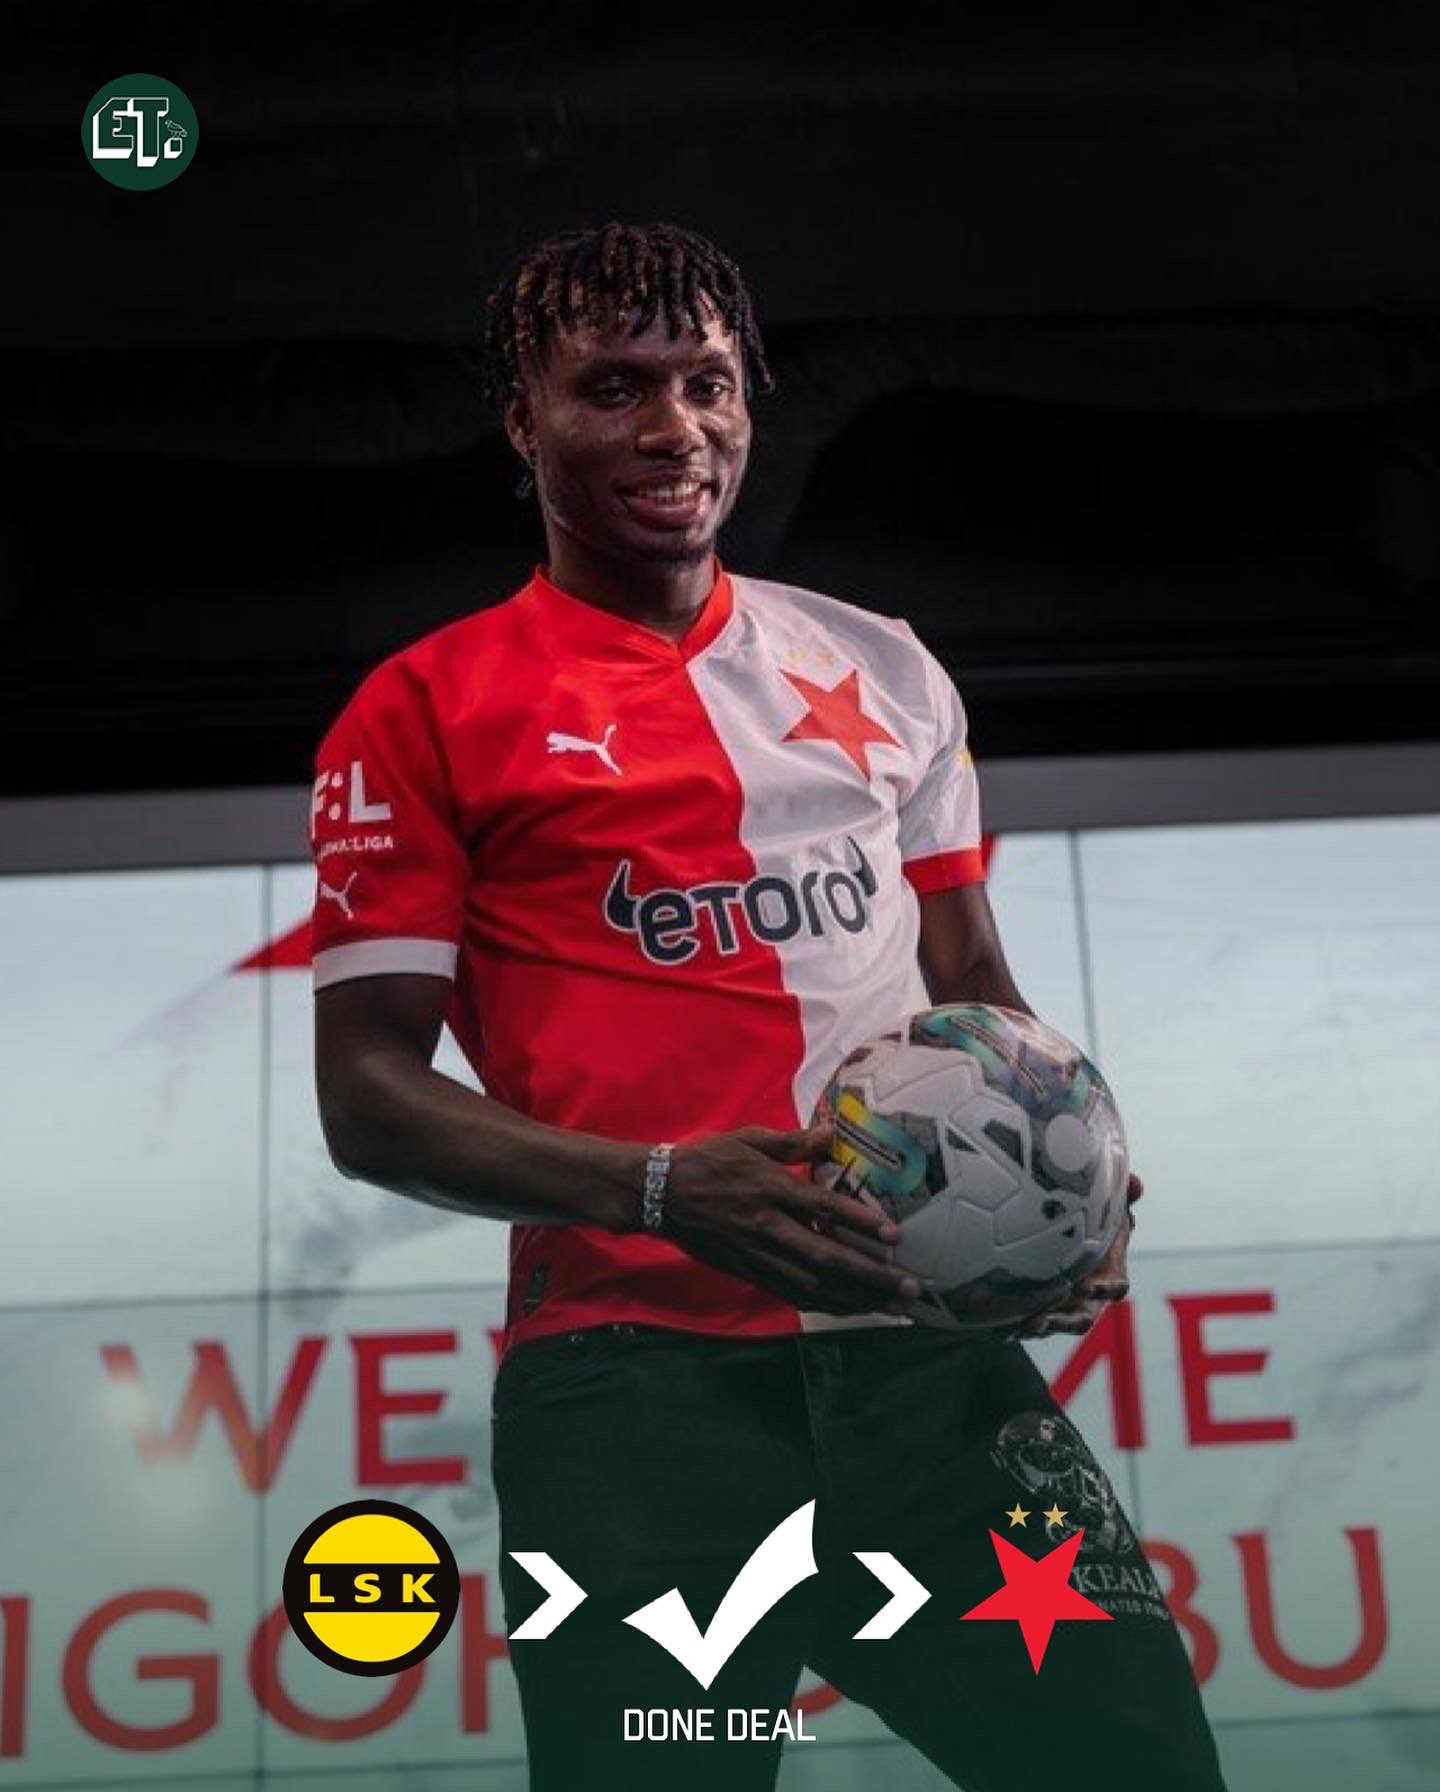 OFFICIAL: Slavia Praha have completed the signing of Nigerian